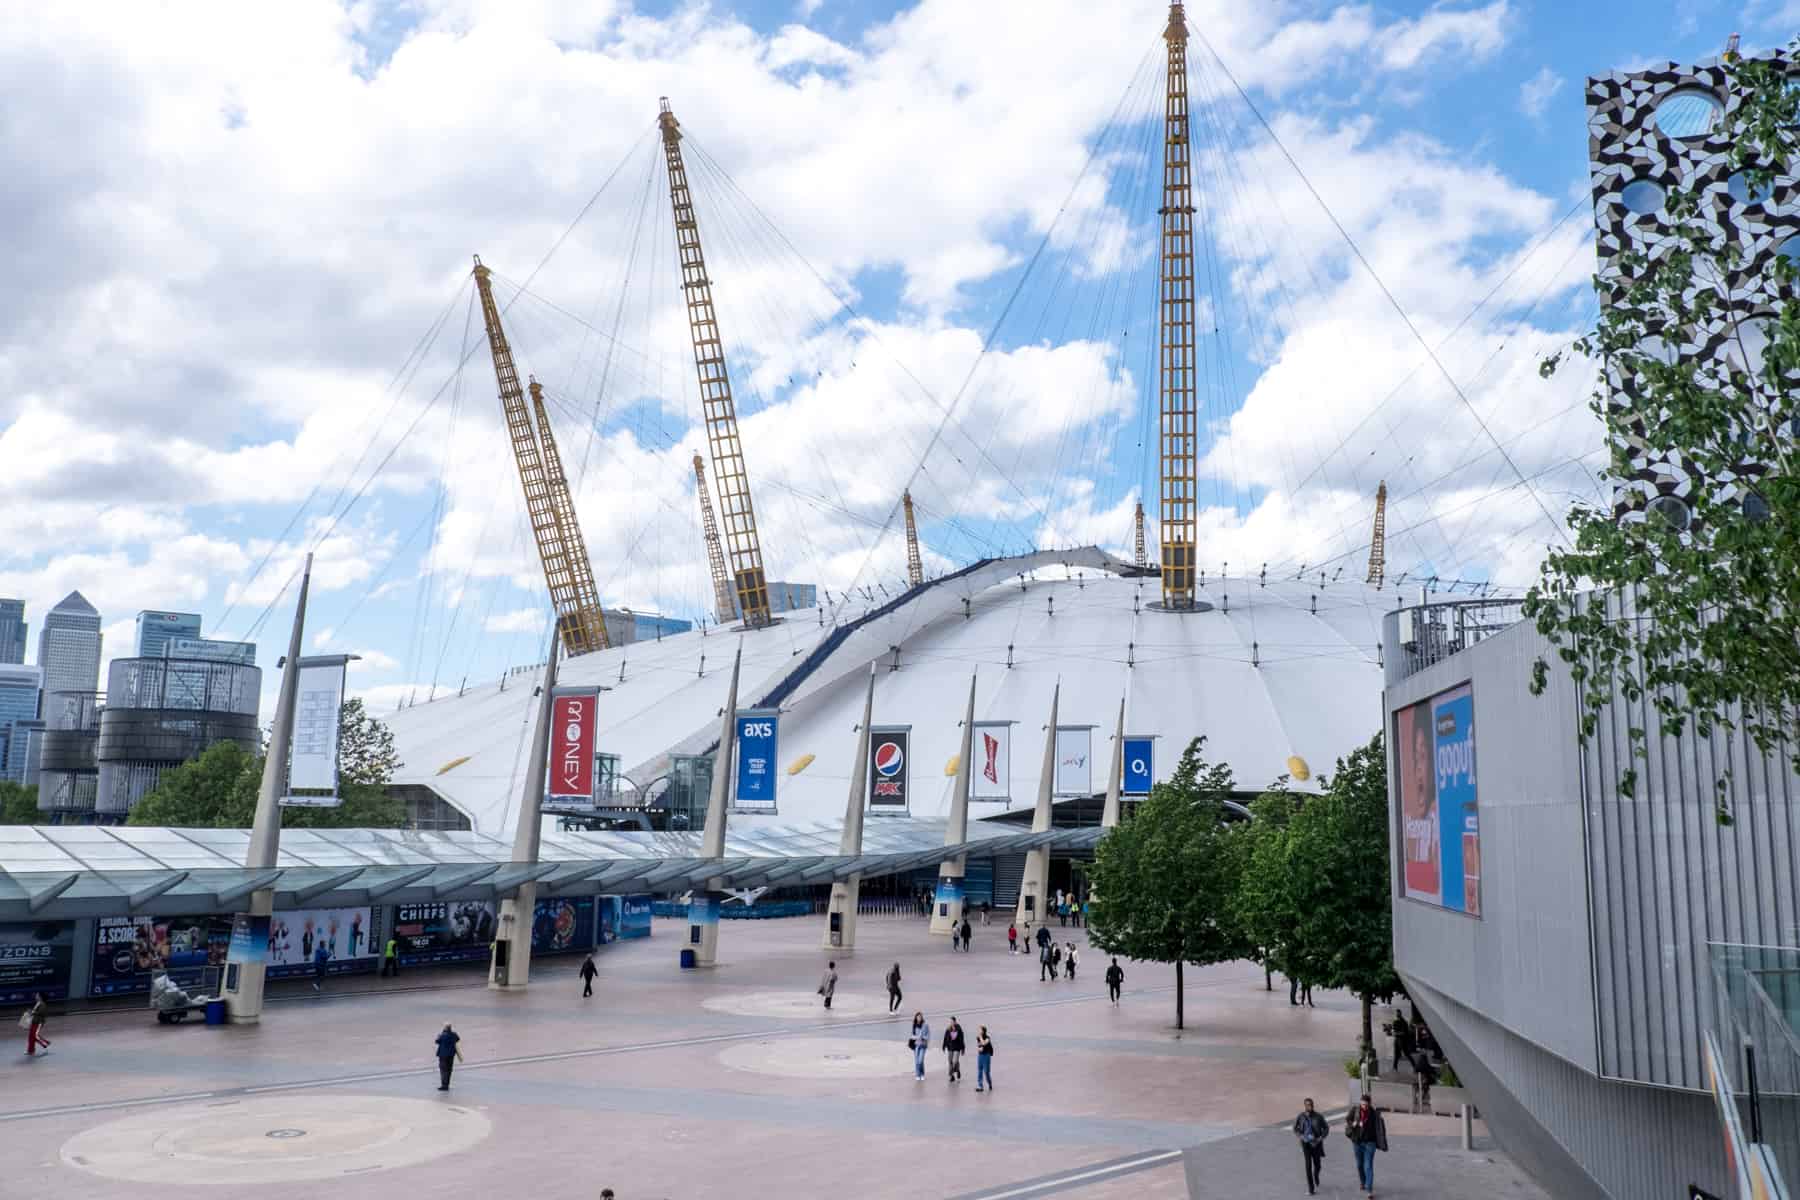 People walk in front of the O2 arena with a white dome exterior, yellow towers and a blue walkway over its roof. 